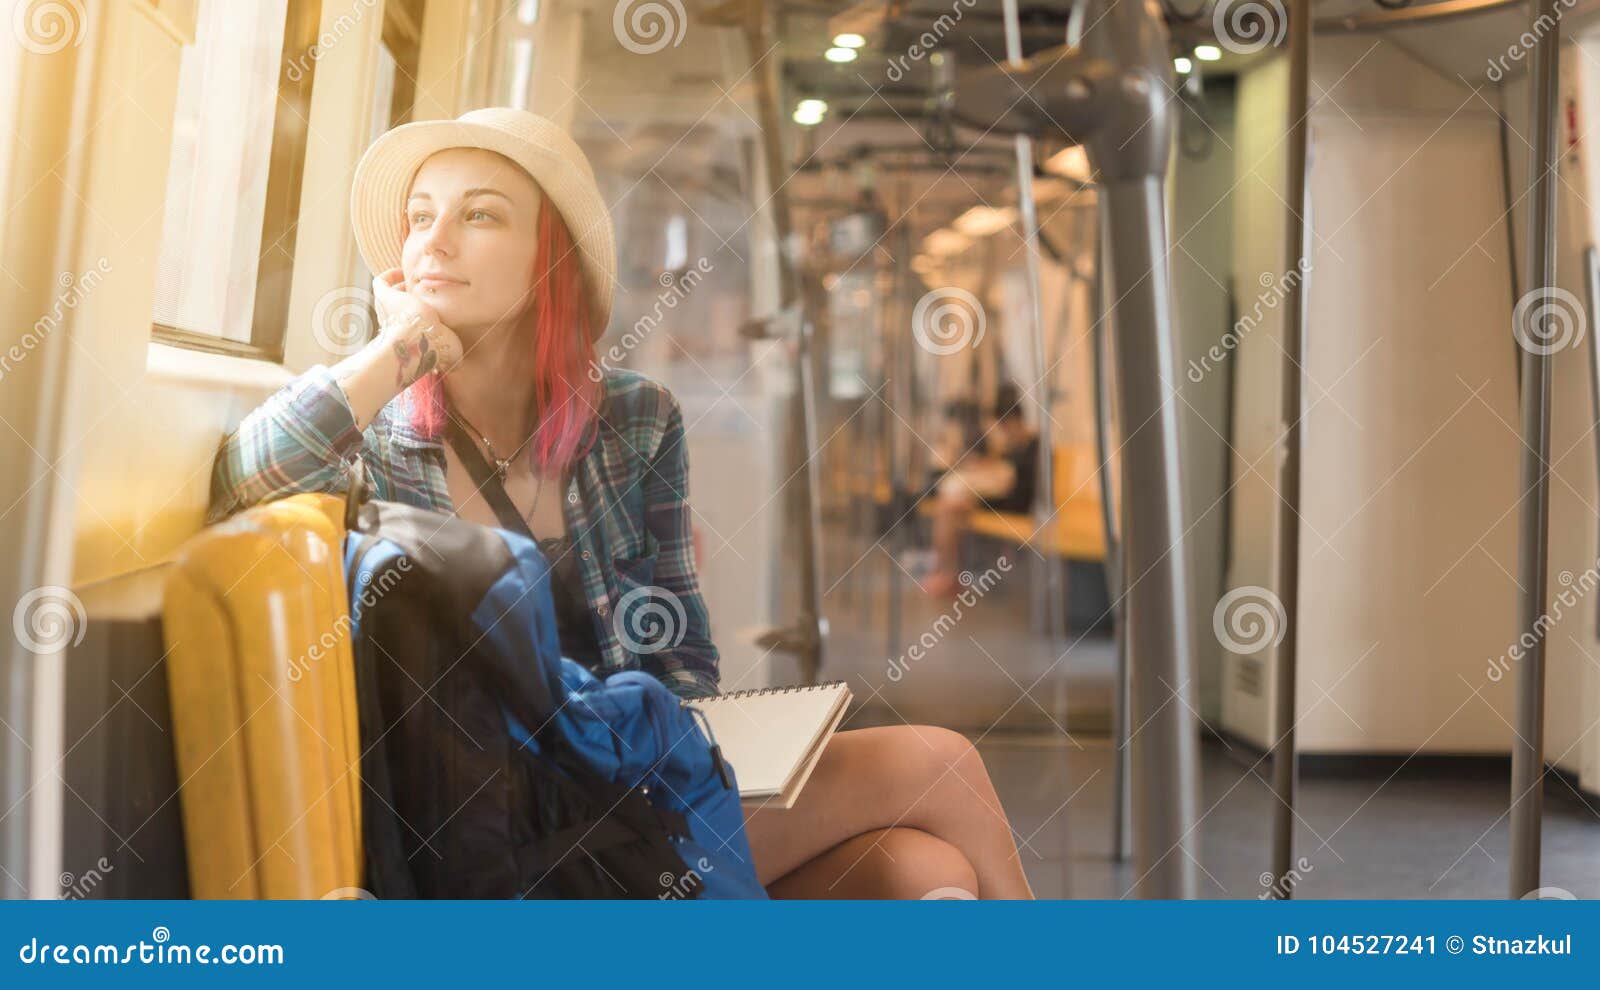 woman westerner admire view from train`s window